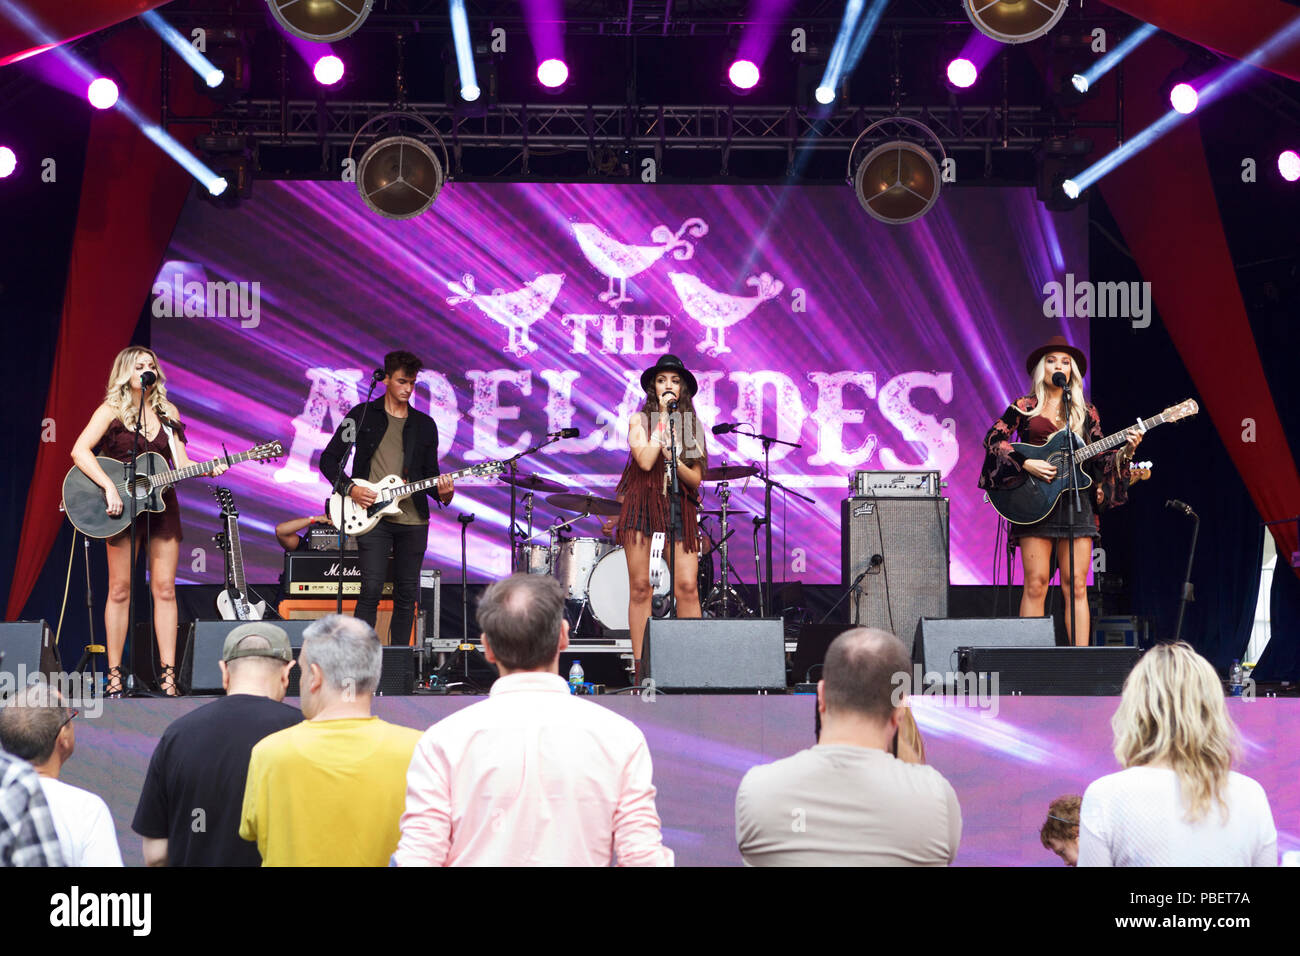 London UK, 28th July, 2018. A Country music festival - Nashville Meets London - on the 28th and 29th July at Canary Wharf. The Adelaides perform on stage. Stock Photo